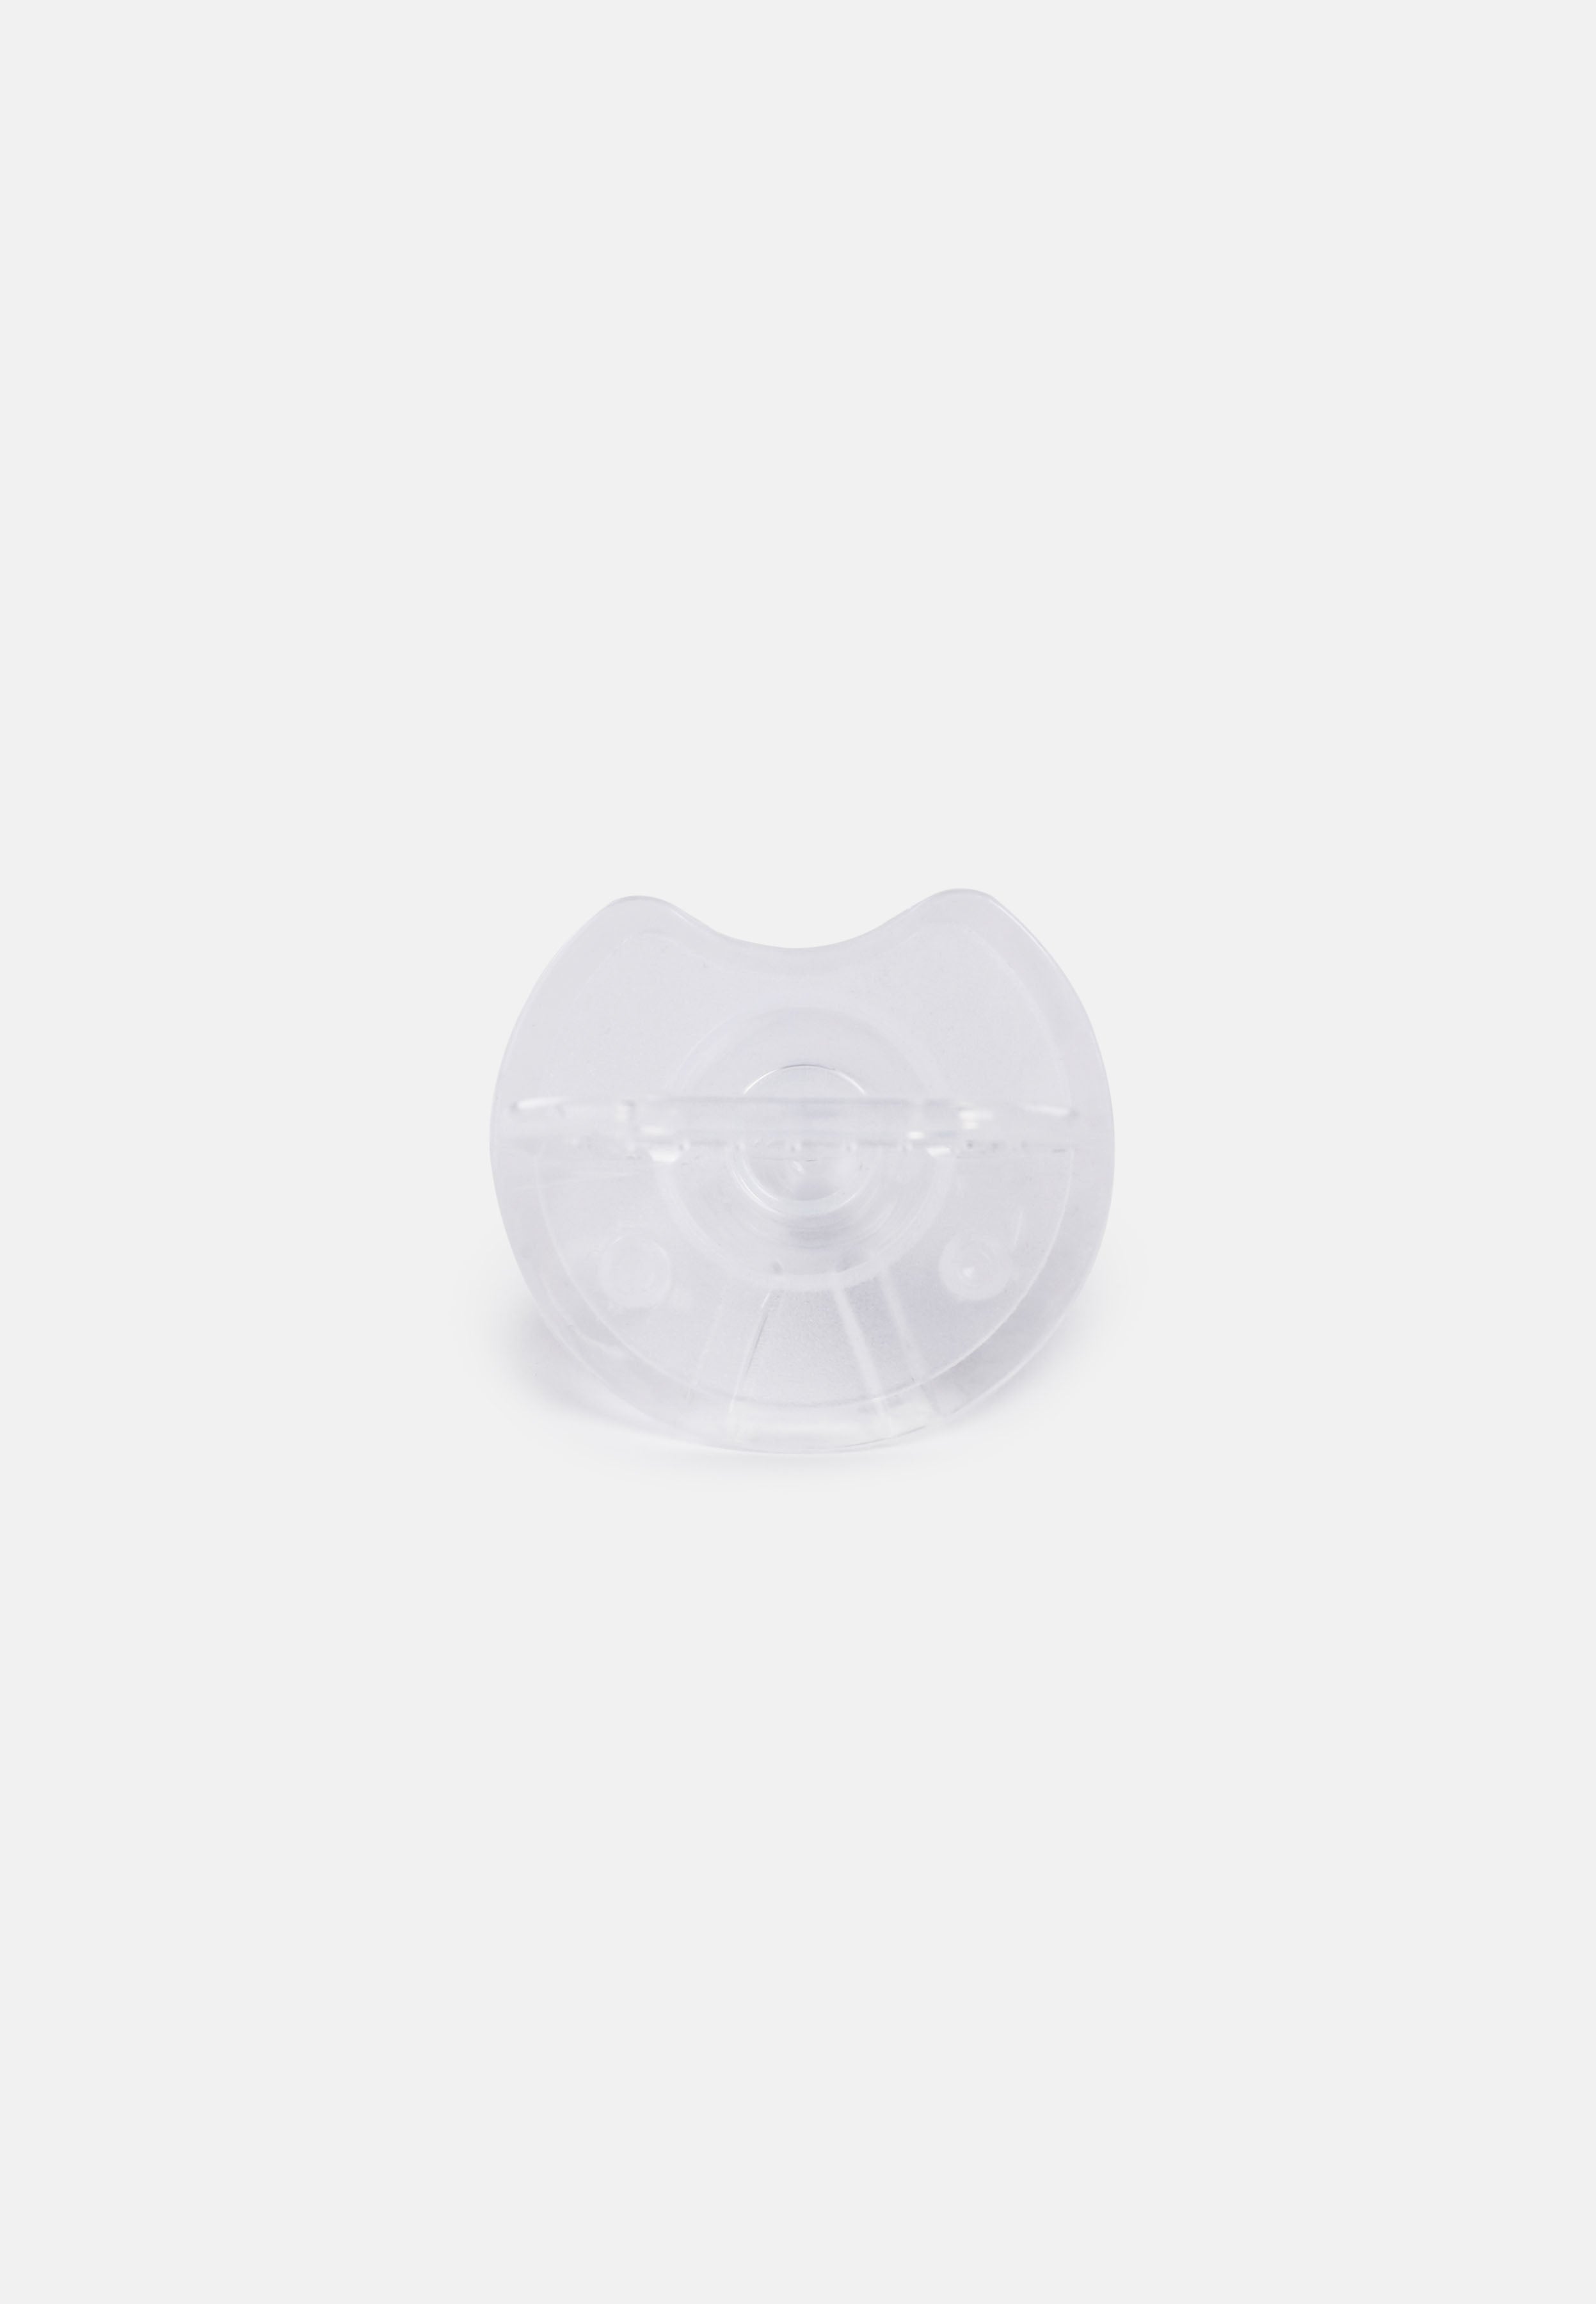 Baby Cheetah Silicone Cherry Soother with Cover (Complete Soother) (0-6M) - CBB-ST21090